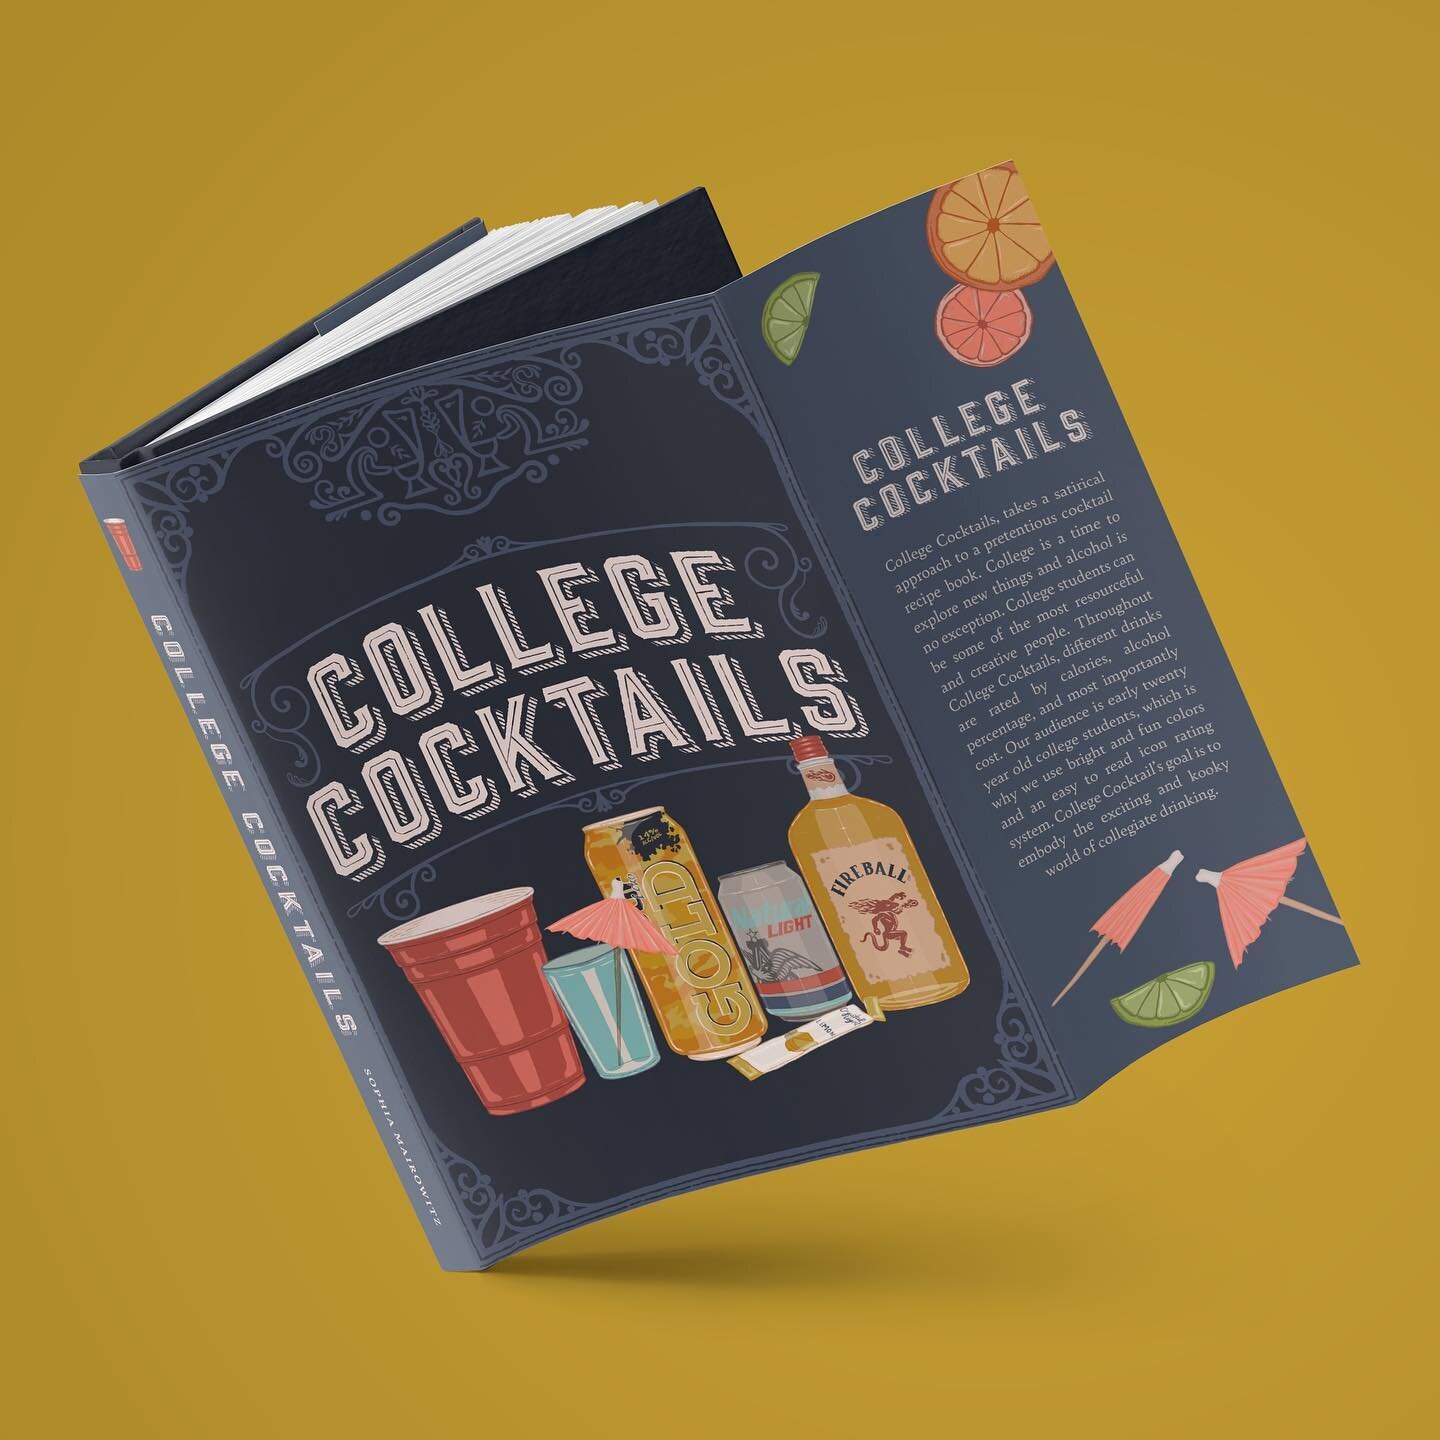 Wrapping up College Cocktails (for now) a drink recipe book I wrote and illustrated in publishing last semester and wrapped up in portfolio (even though I will probably never be done adding onto it) 

One of my favorite projects ever, a closer look i